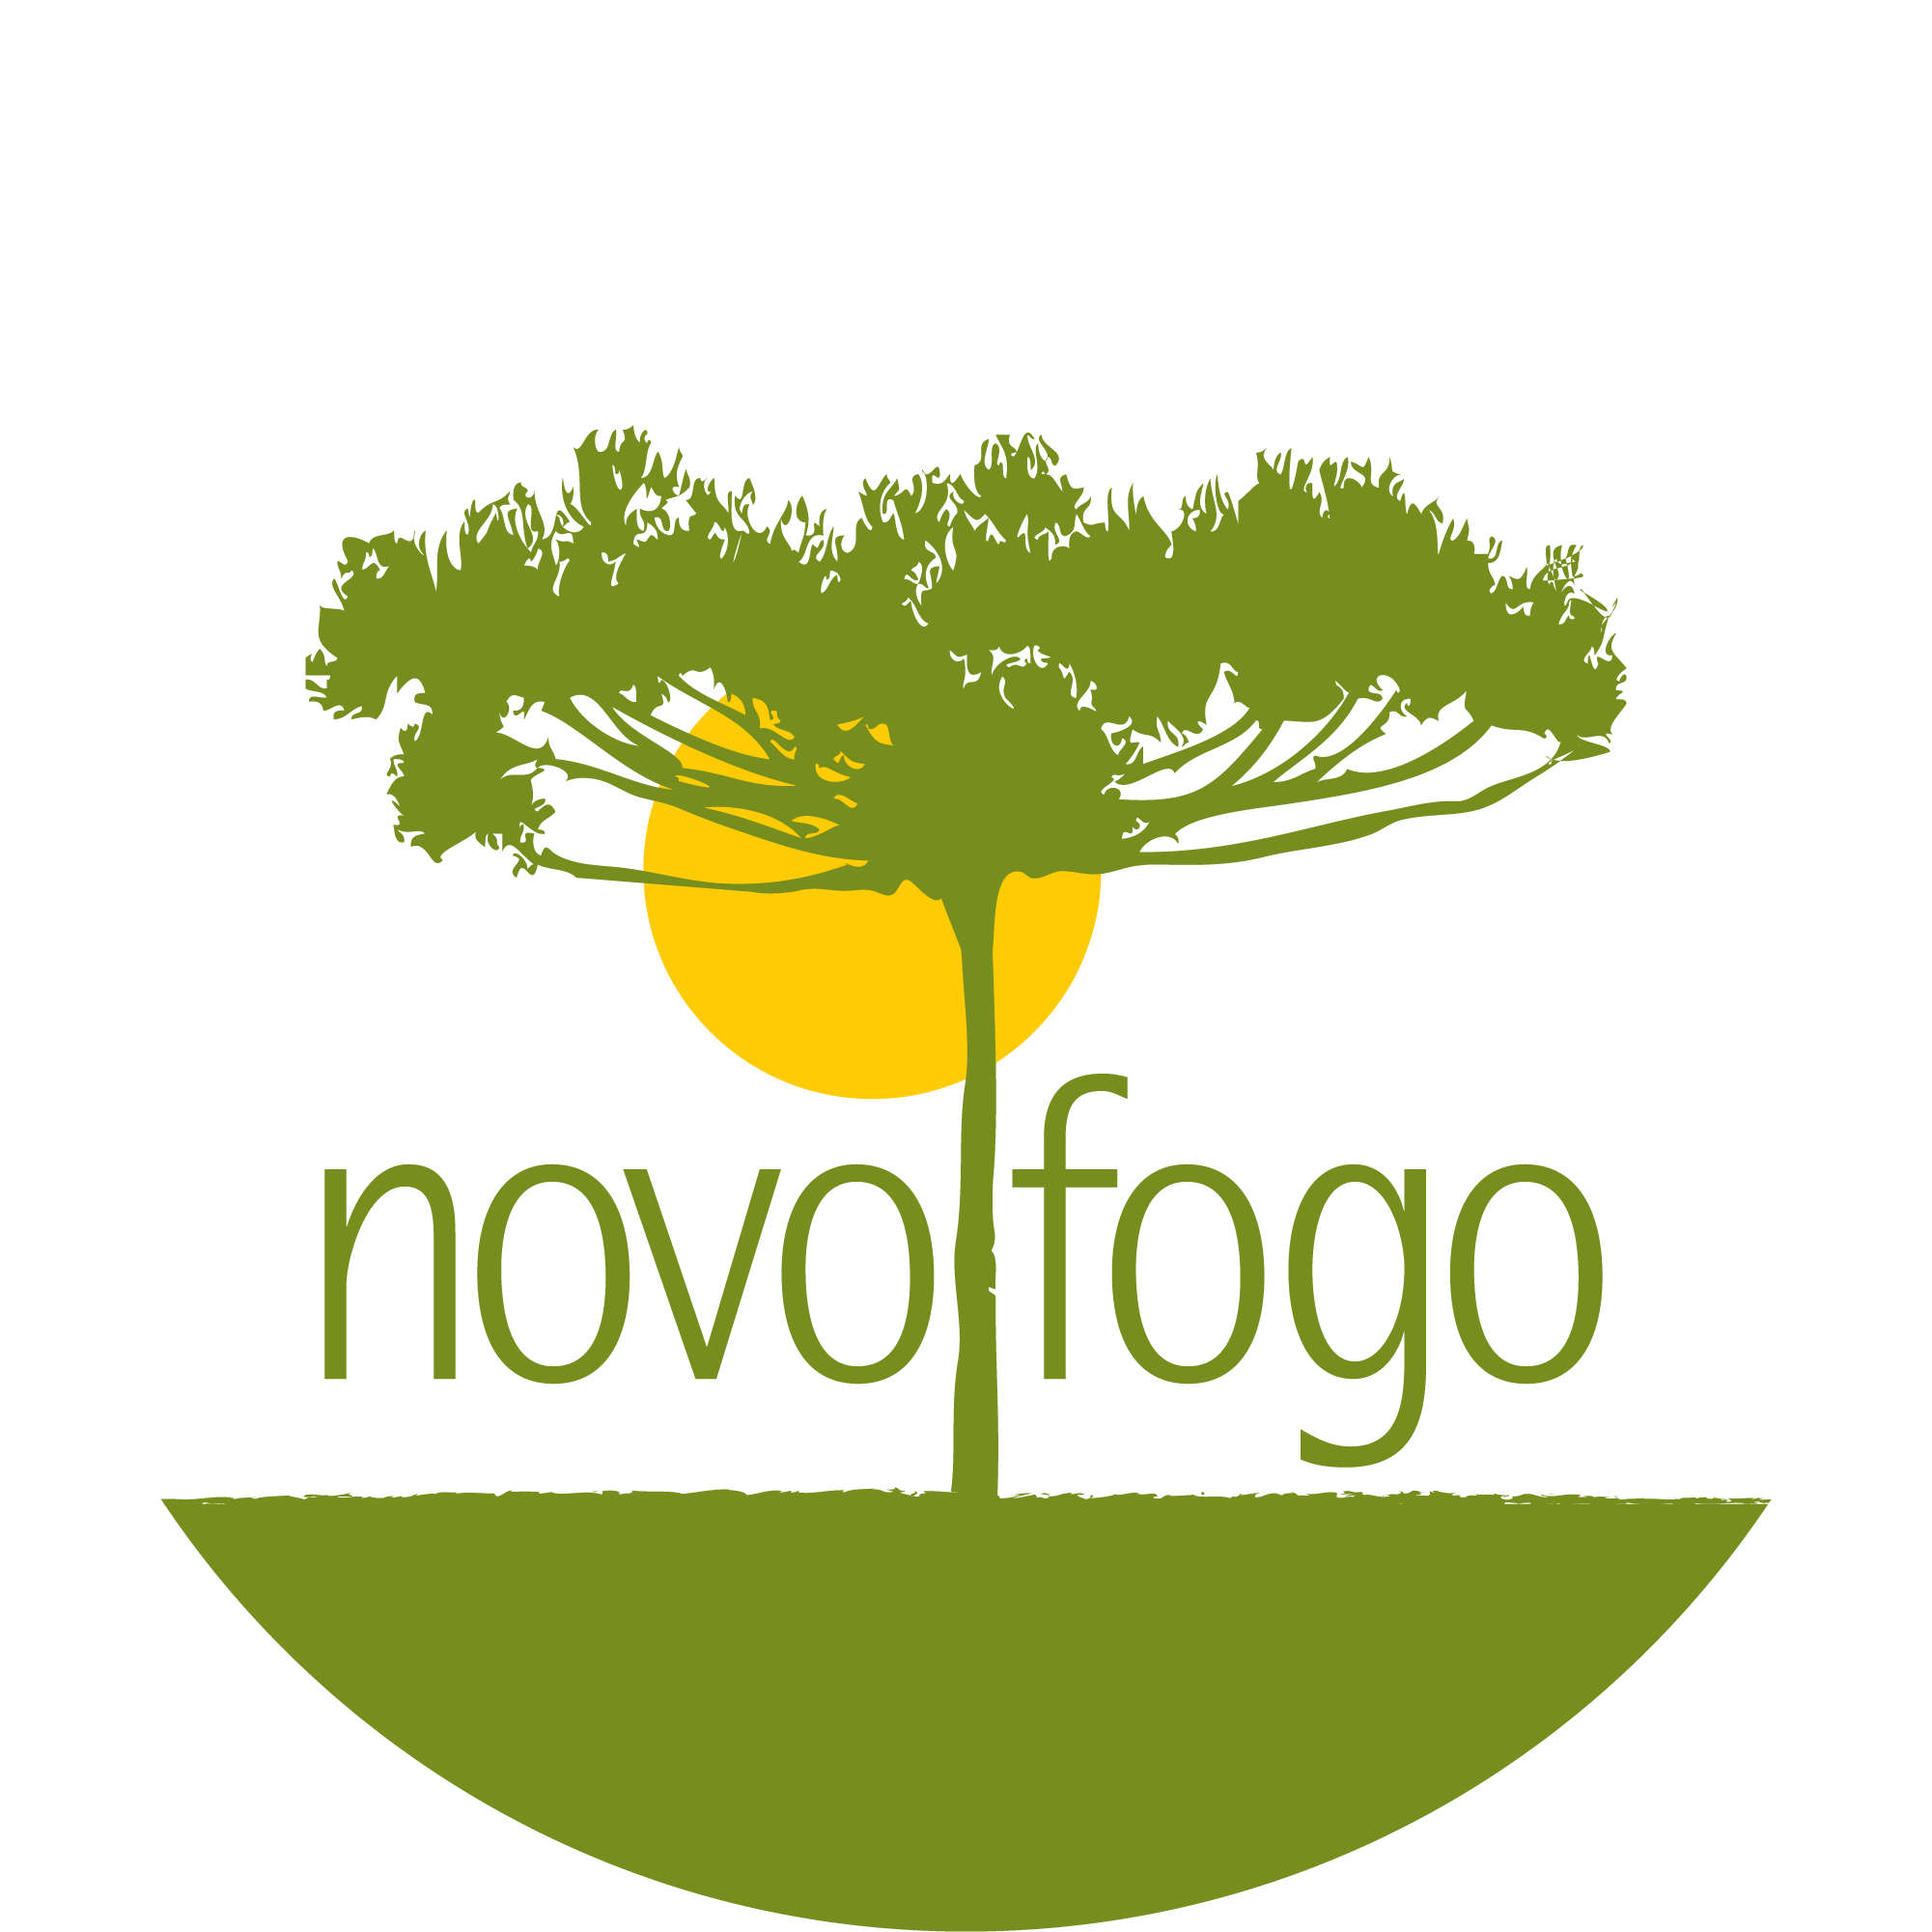 100,000 Fogo png Vector Images